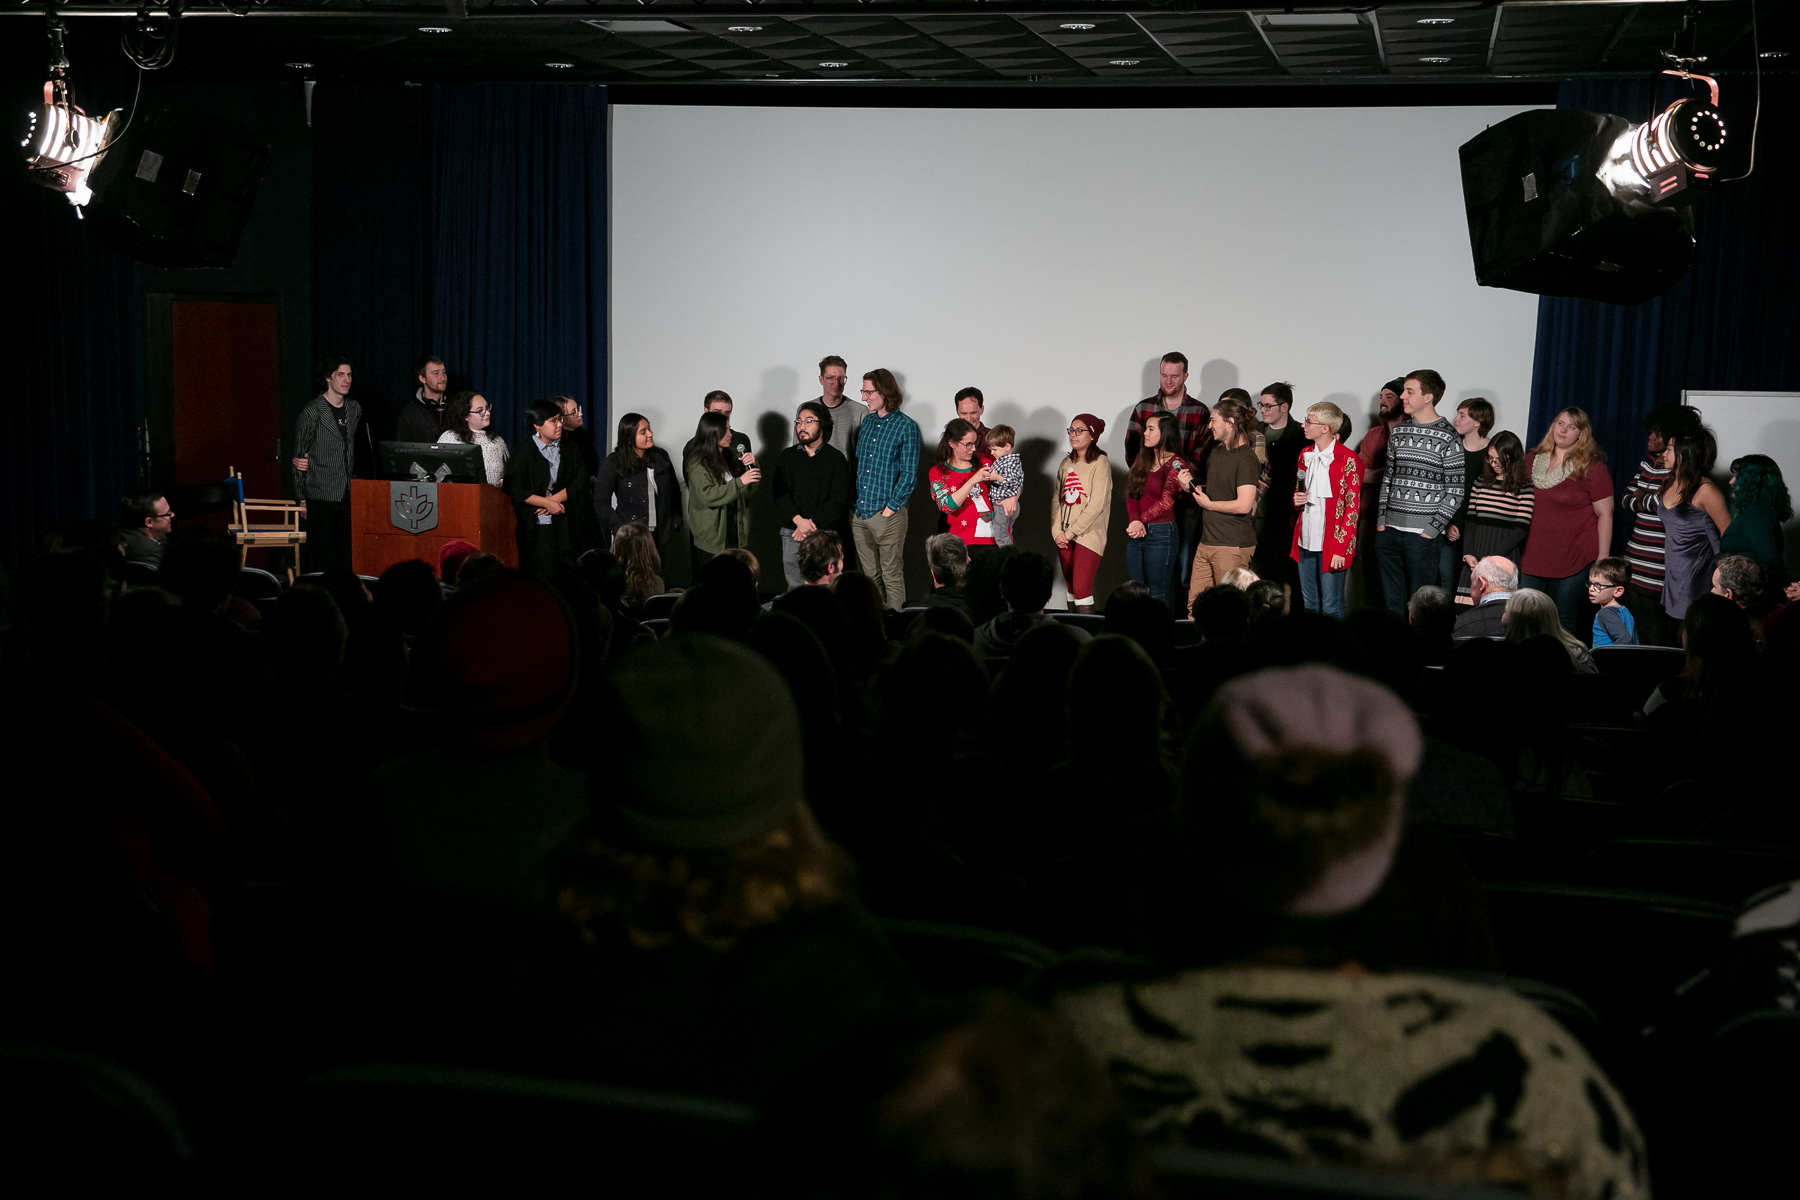 Student filmmakers take questions from the audience during the premiere of their stop-motion film “Merry Christmas from DePaul,” which is part of a holiday window display on the State Street side of DePaul’s Loop Campus. (DePaul University/Randall Spriggs)